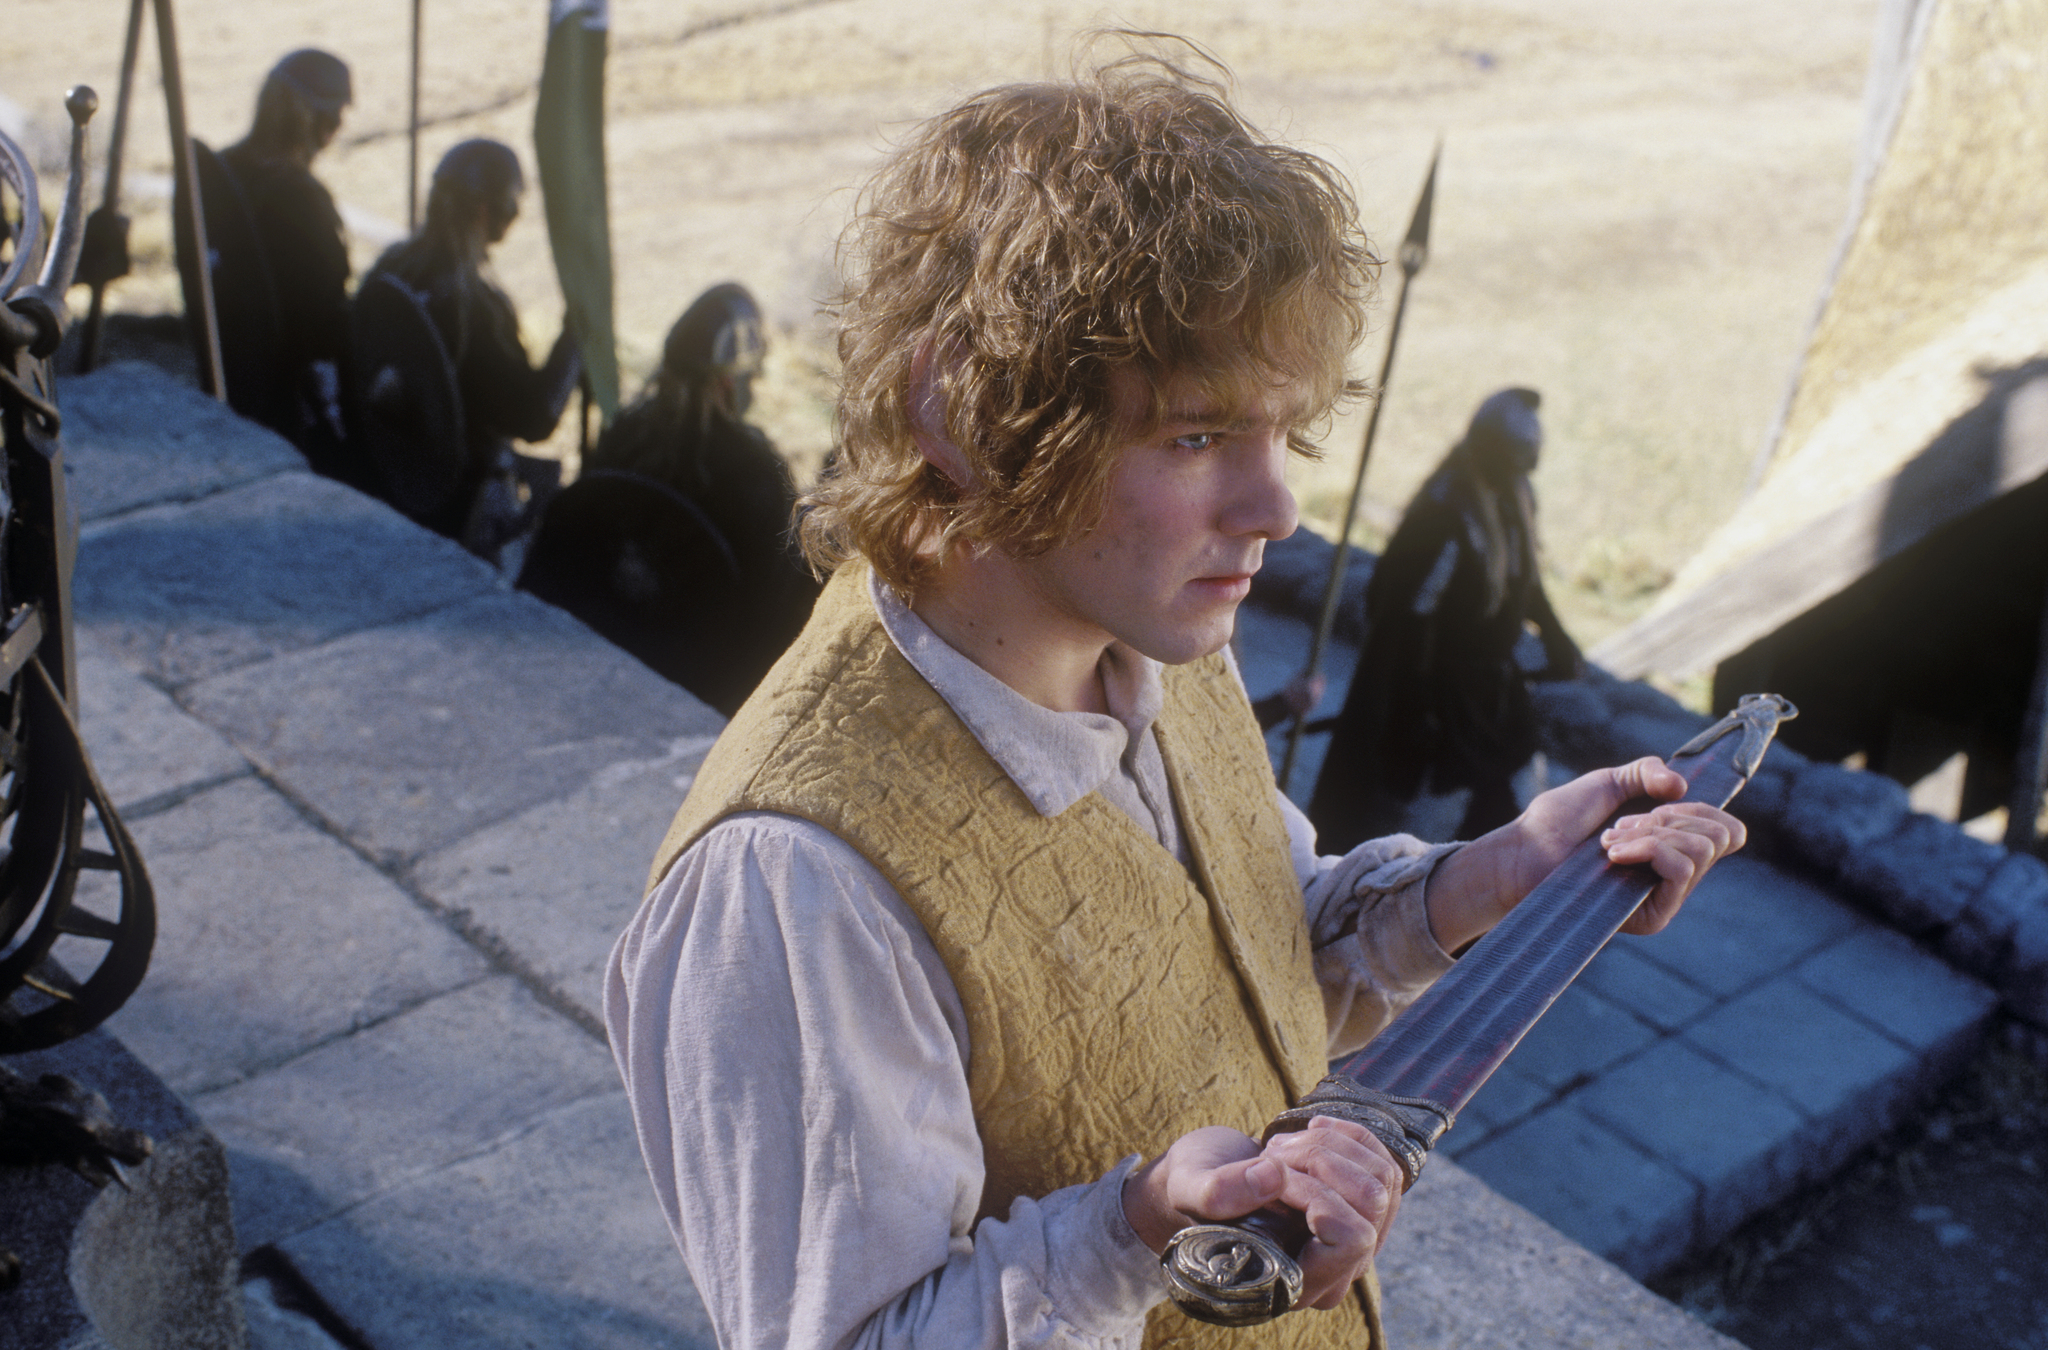 Dominic Monaghan in The Lord of the Rings: The Return of the King (2003)